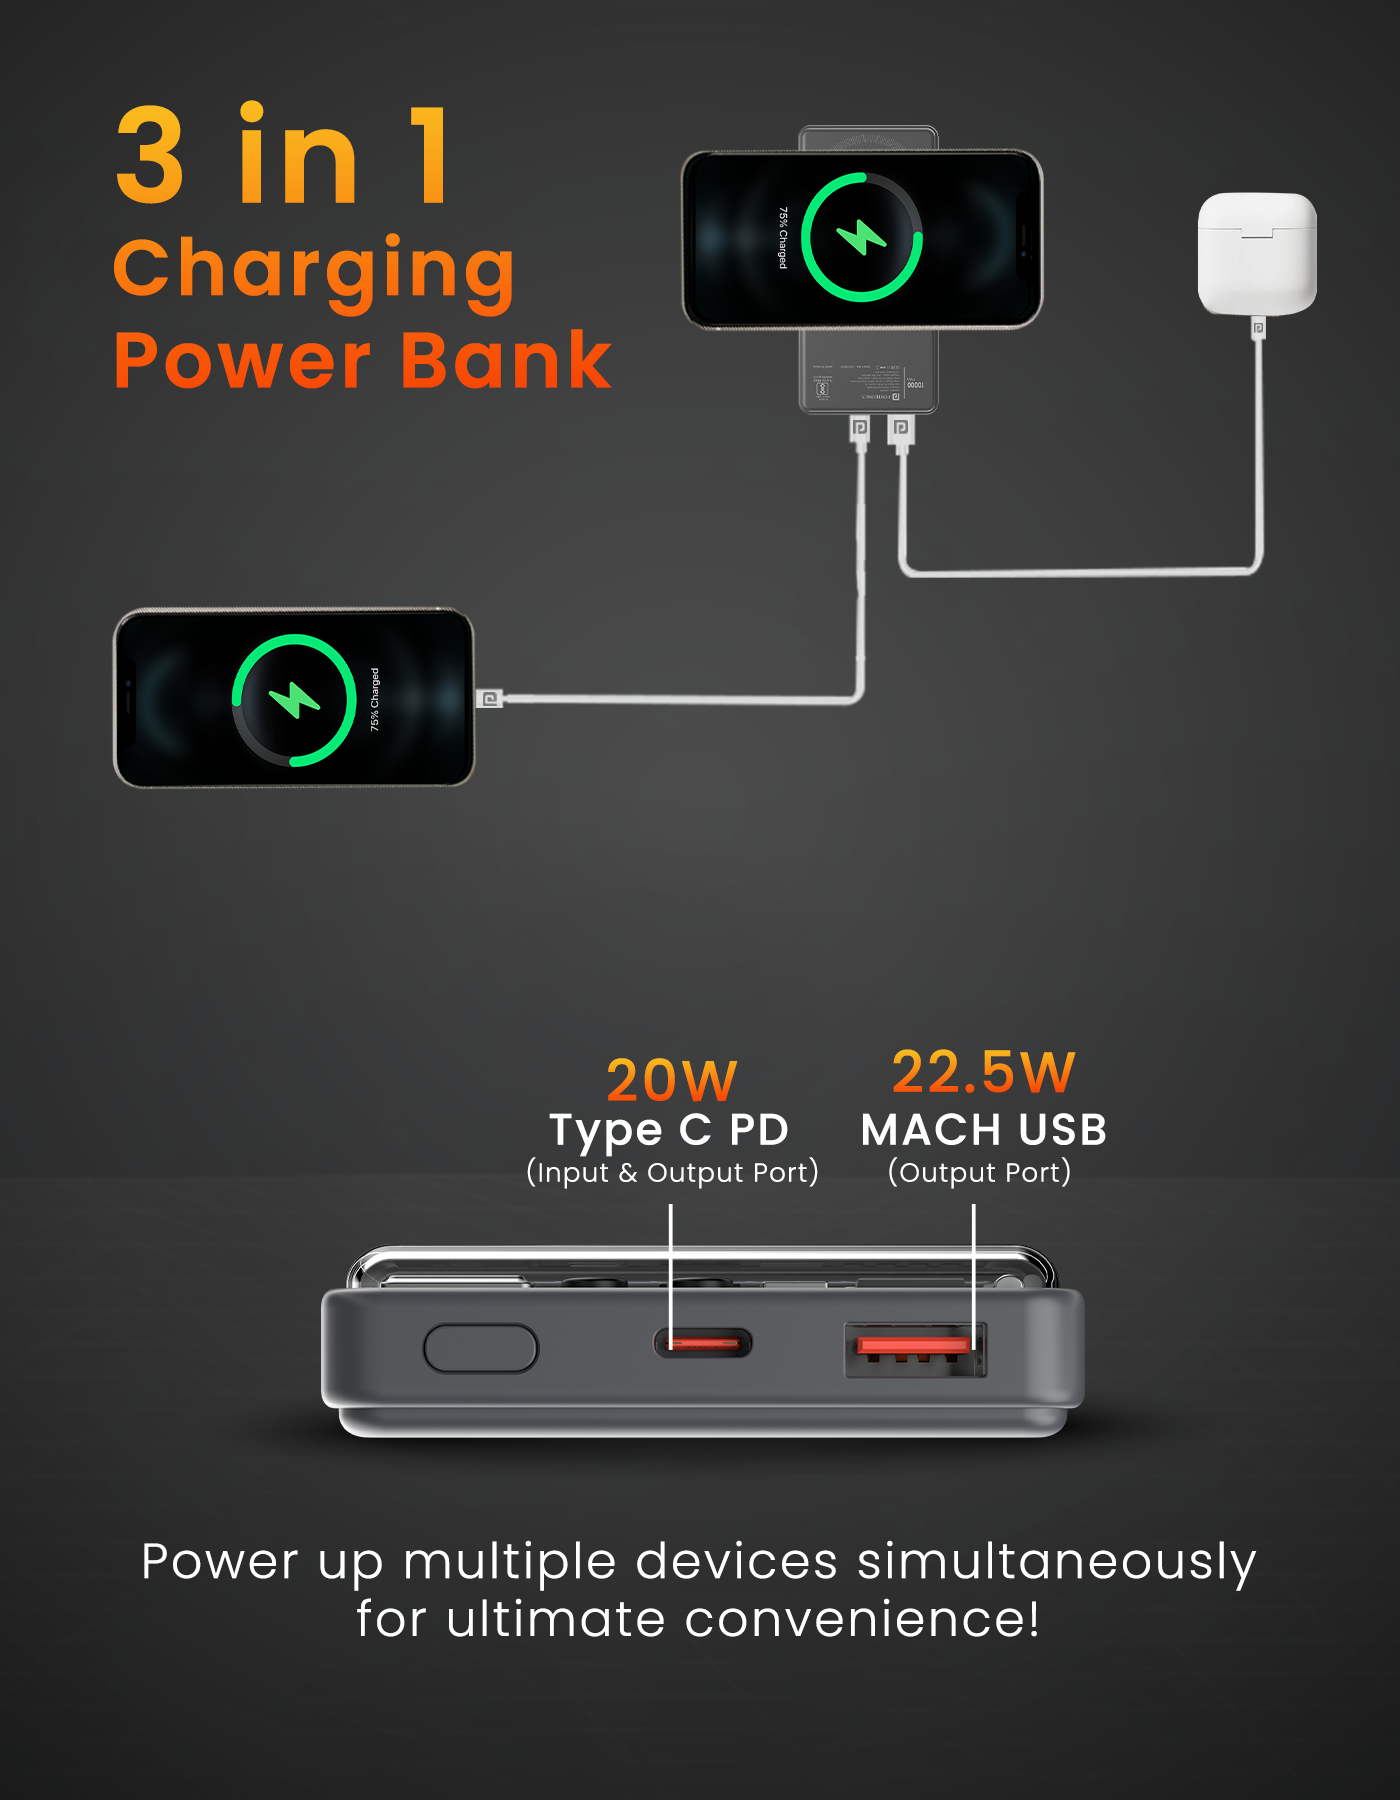 3 in 1 Portronics luxcell wireless 10k 10000mah Power bank can charge 2 devices at a time